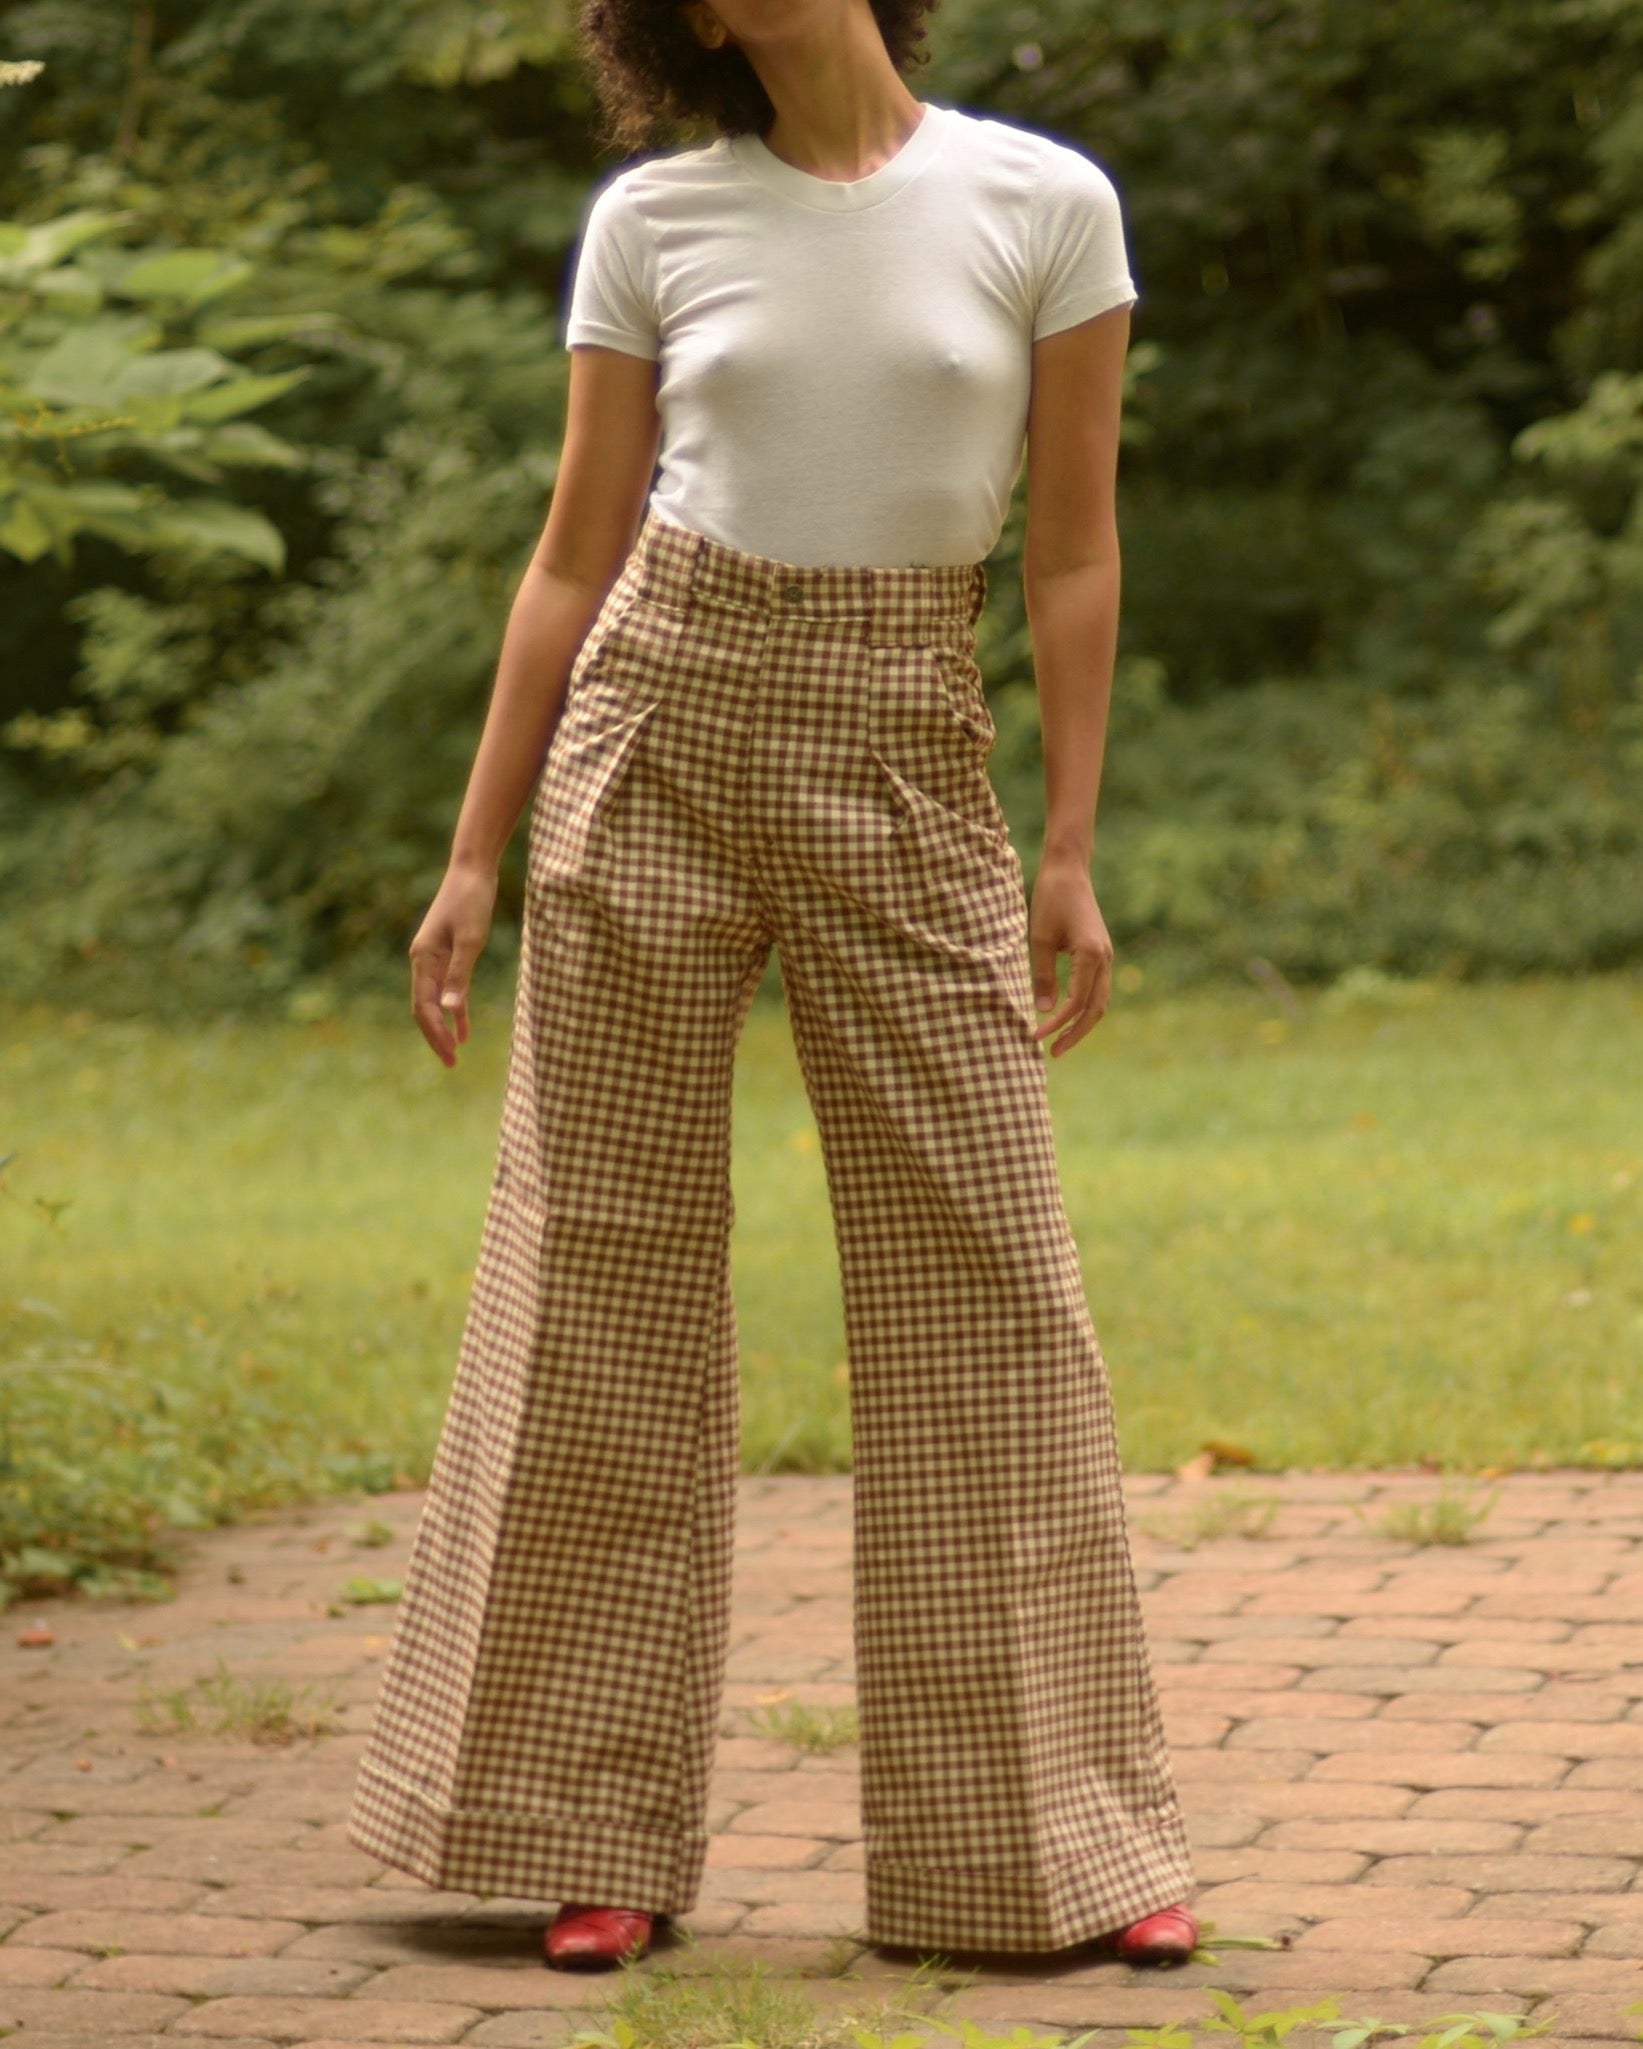 Rare 1970s thick cotton gingham ultra wide leg bell bottom trousers, 27w